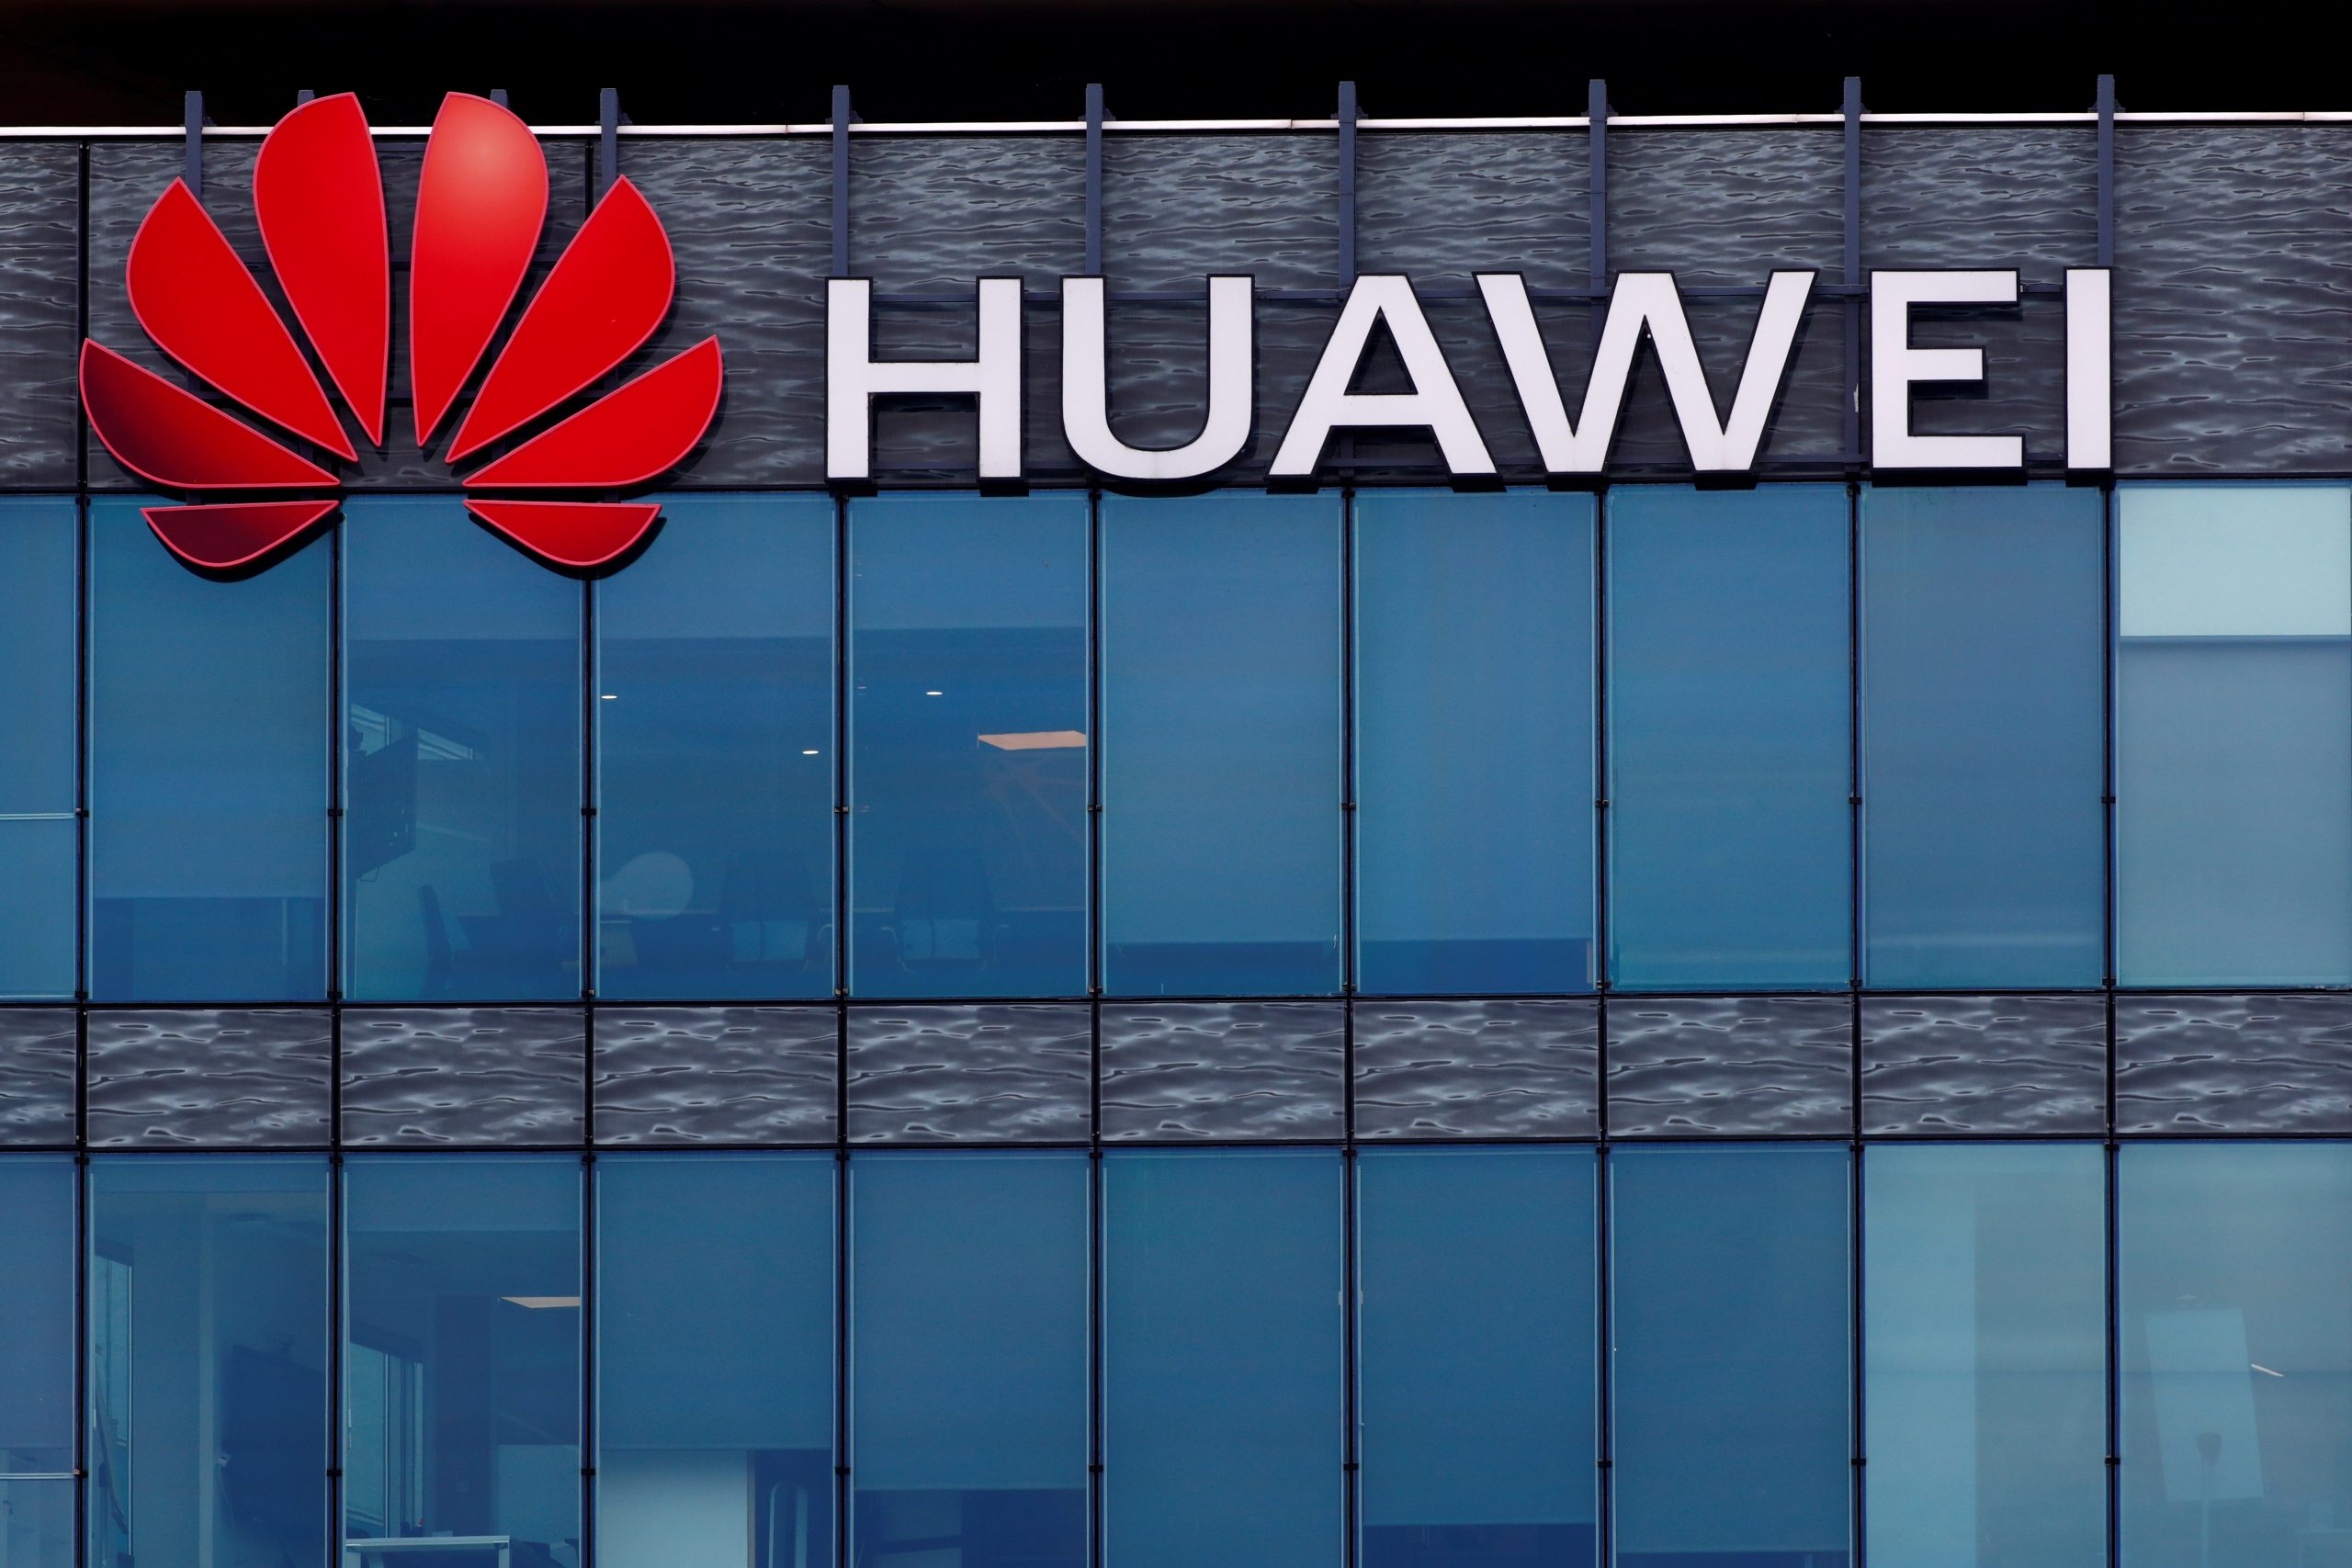 FILE PHOTO: Huawei logo at Huawei Technologies France in Boulogne-Billancourt FILE PHOTO: A view shows a Huawei logo at Huawei Technologies France headquarters in Boulogne-Billancourt near Paris, France, July 15, 2020. REUTERS/Gonzalo Fuentes/File Photo GONZALO FUENTES